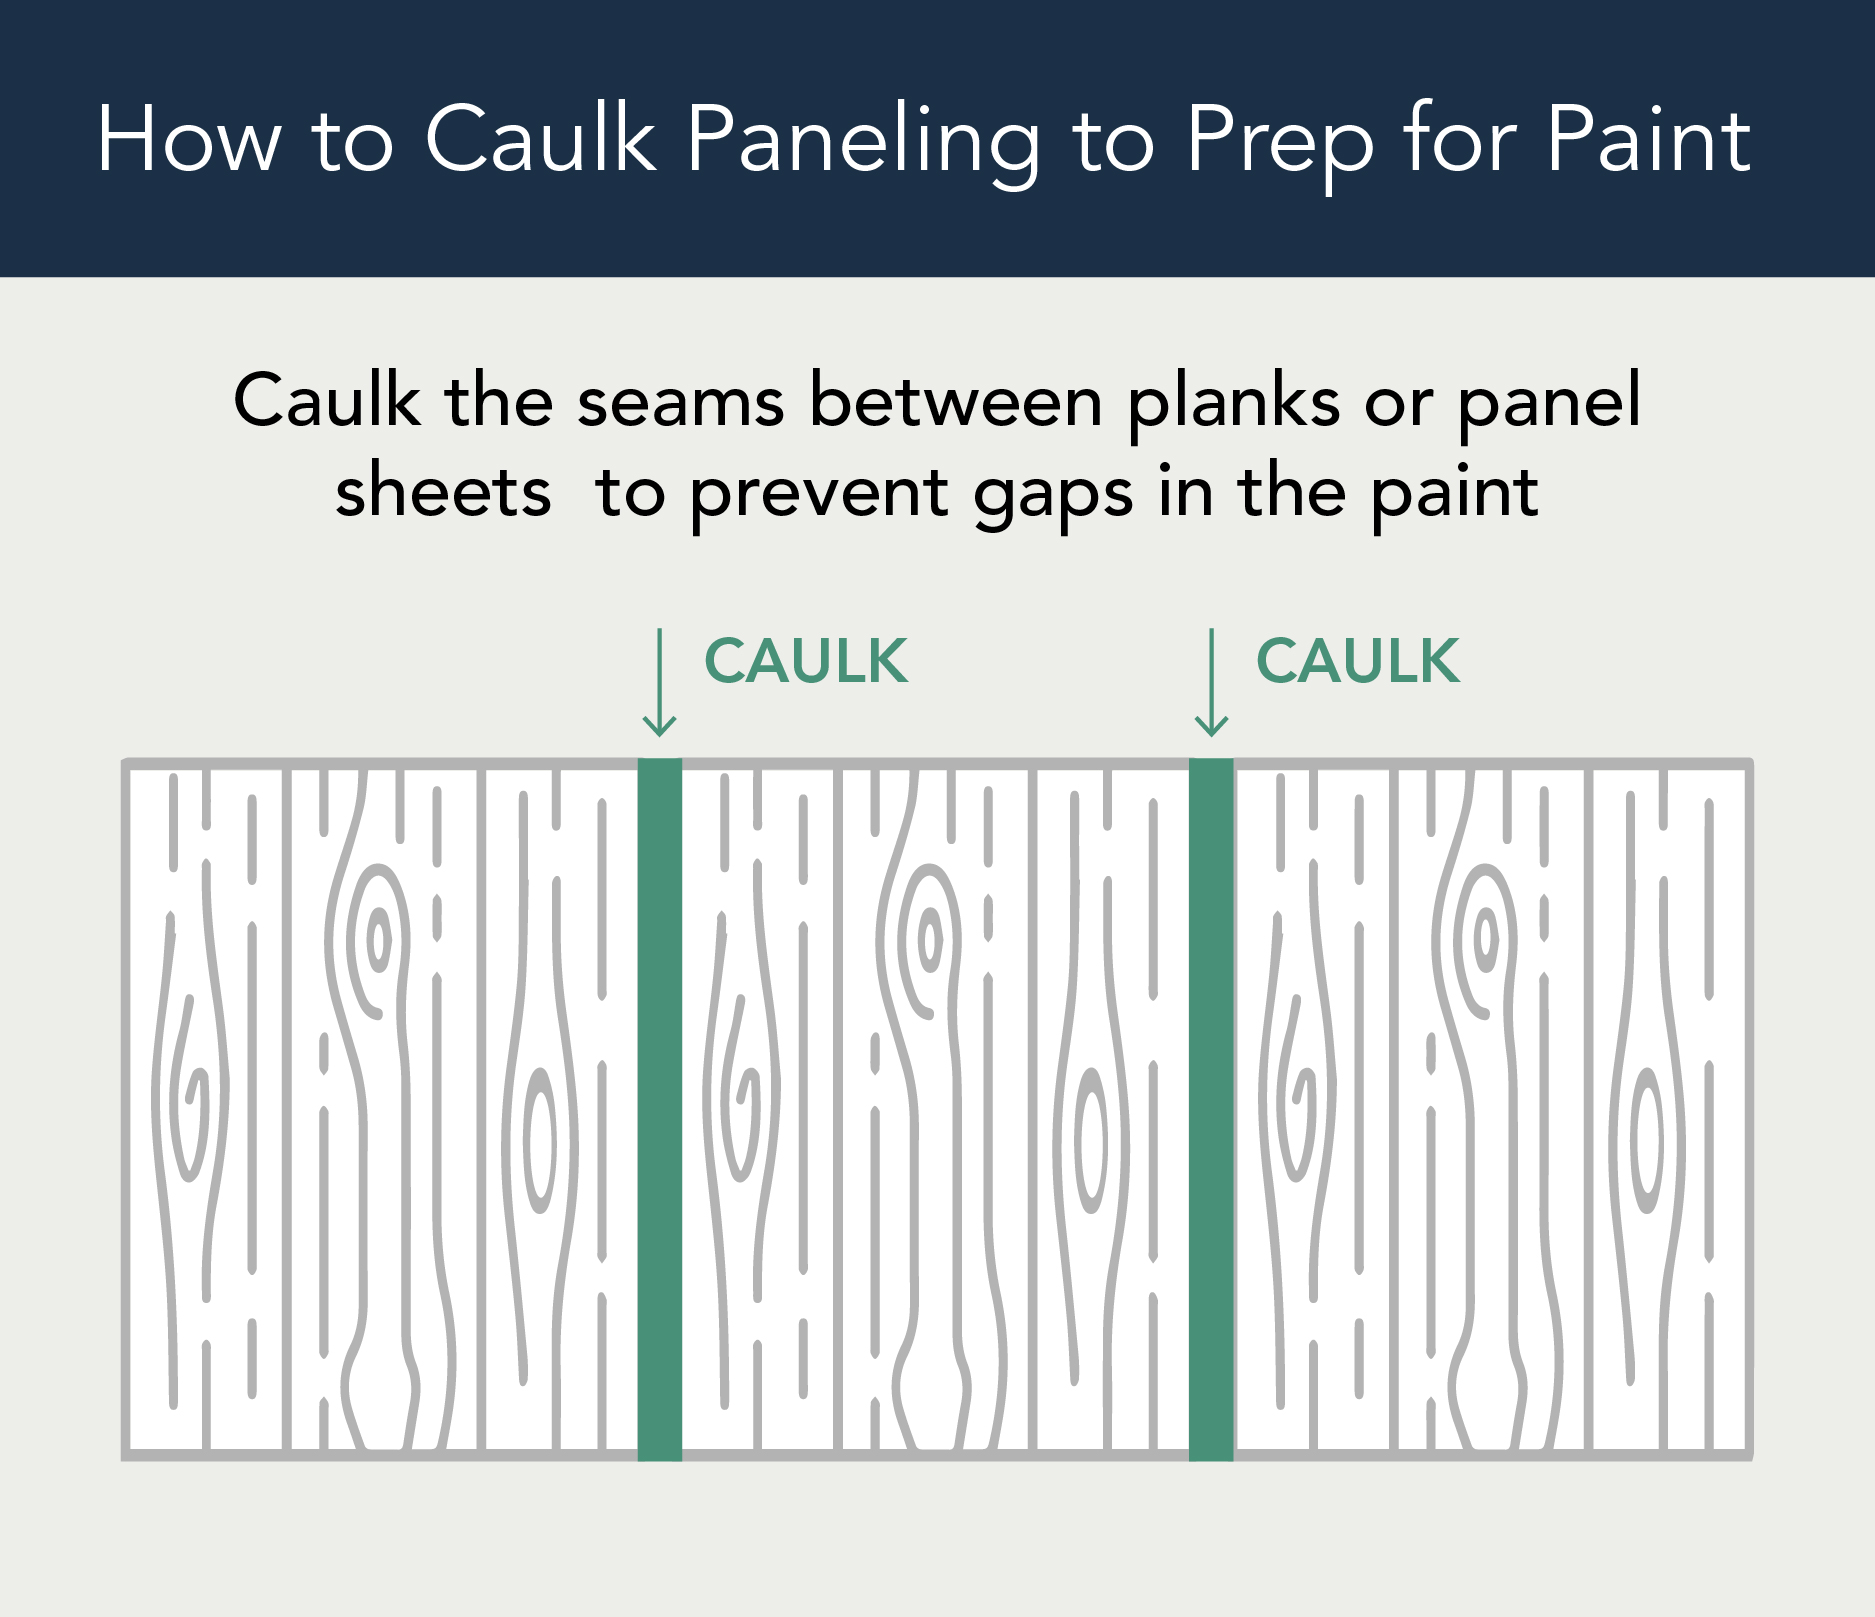 How to caulk paneling to prep for paint